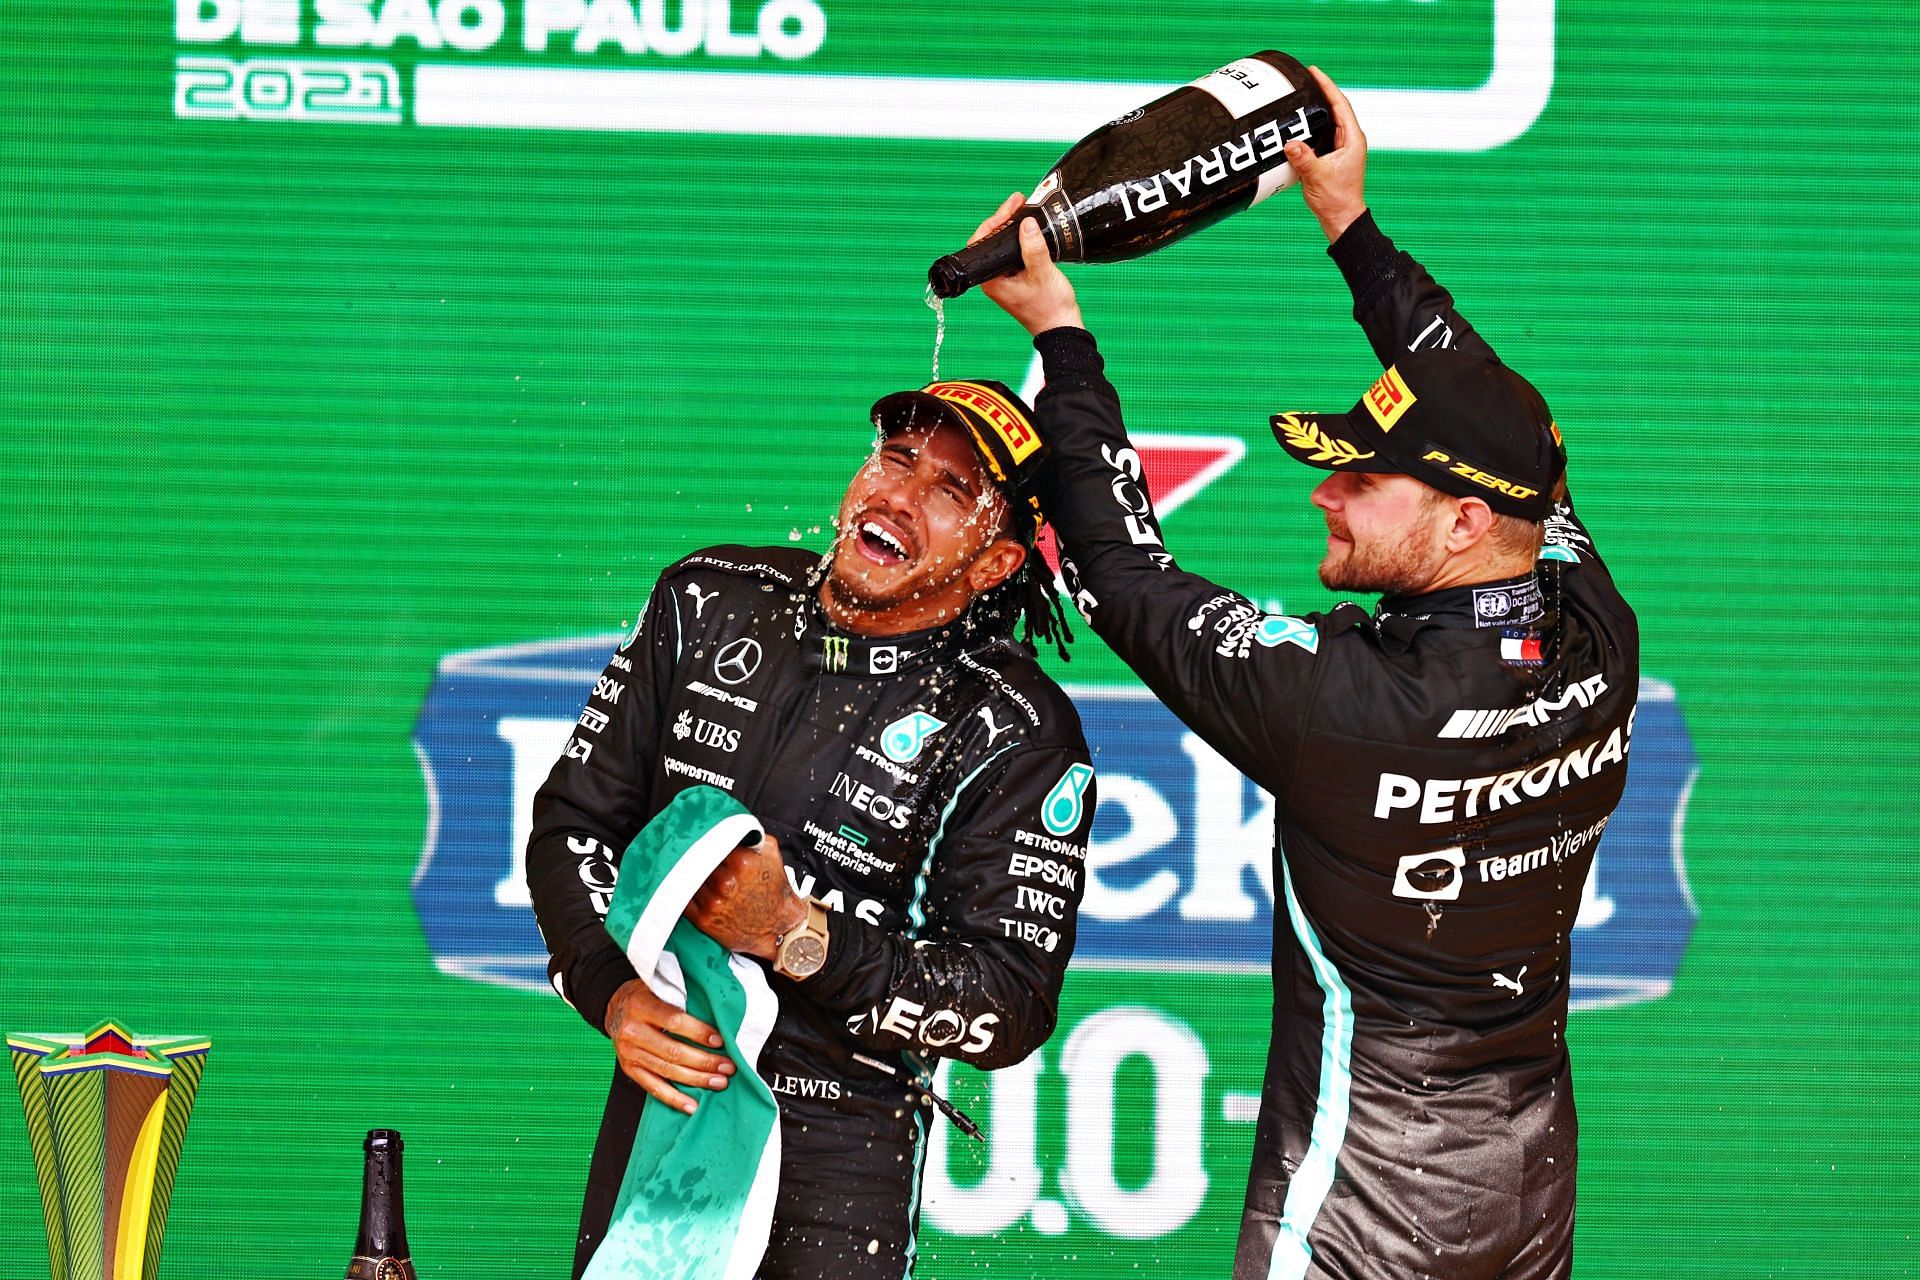 Lewis Hamilton (left) and Valtteri Bottas (right) on the podium of the 2021 Sao Paulo Grand Prix (Photo by Mark Thompson/Getty Images)